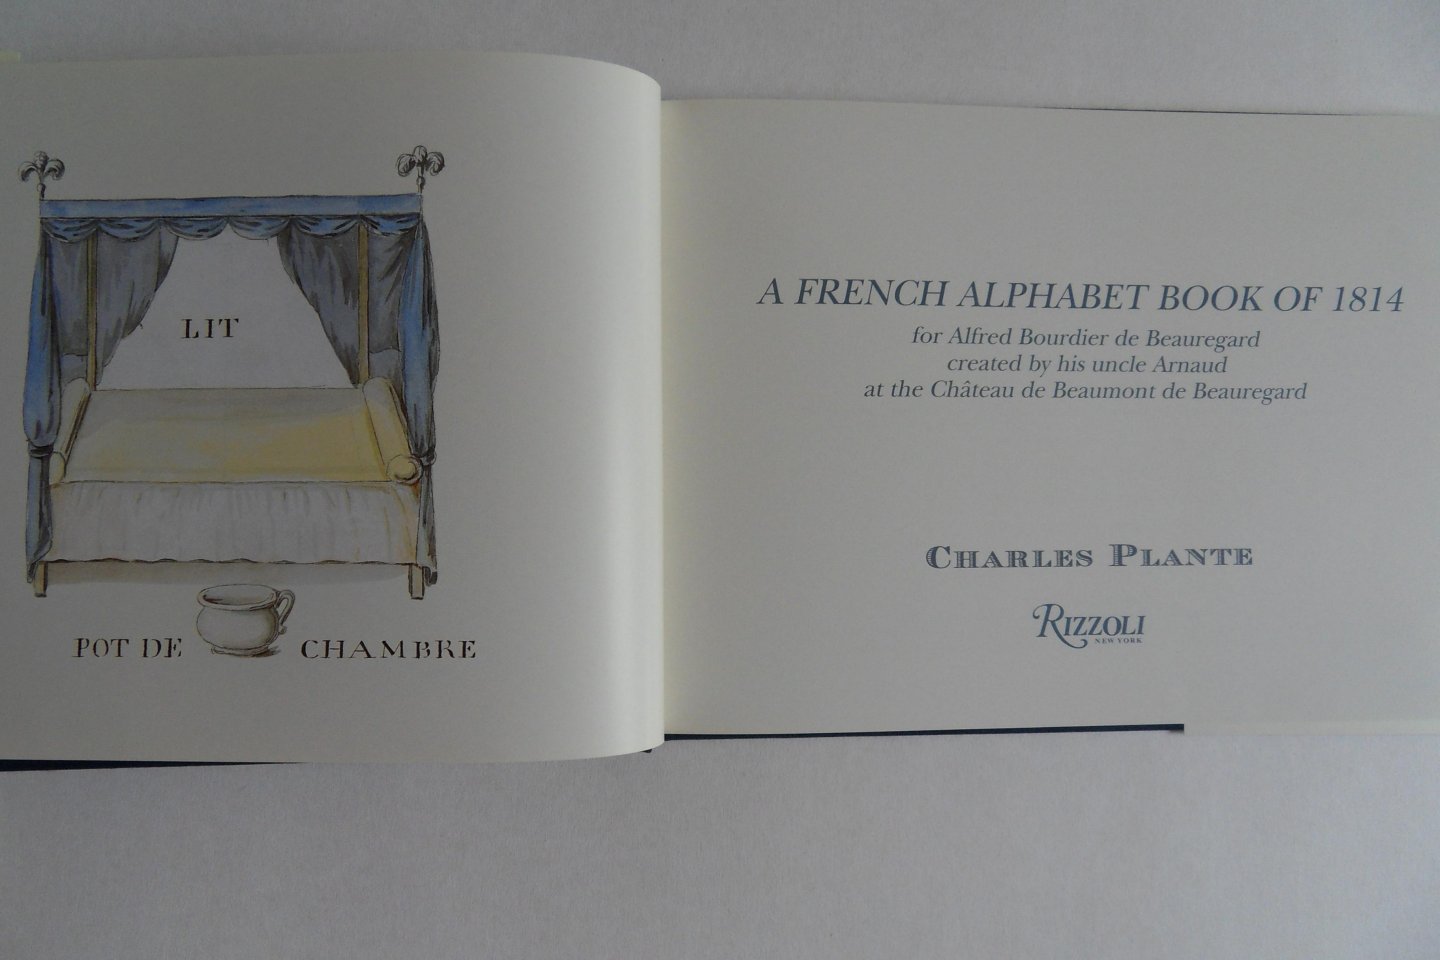 Plante, Charles. - A French Alphabet Book of 1814. - For Alfred Bourdier De Beauregard. - Created by His Uncle Arnaud at the Chateau De Beaumont De Beauregard.